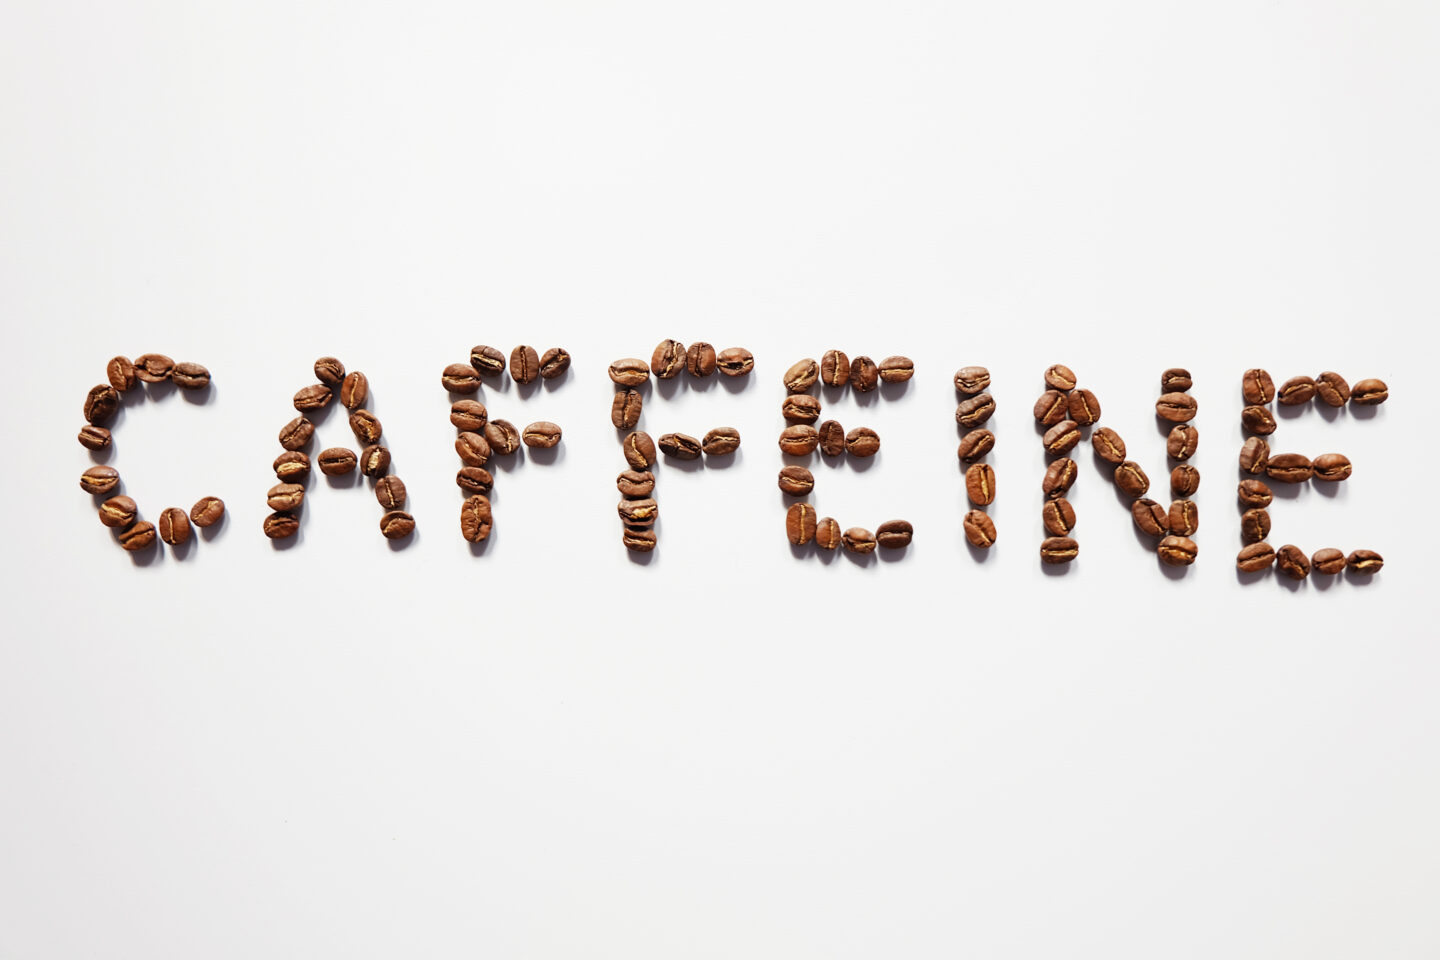 Letter,Of,Caffeine,Arranged,With,Coffee,Beans,On,White,Background